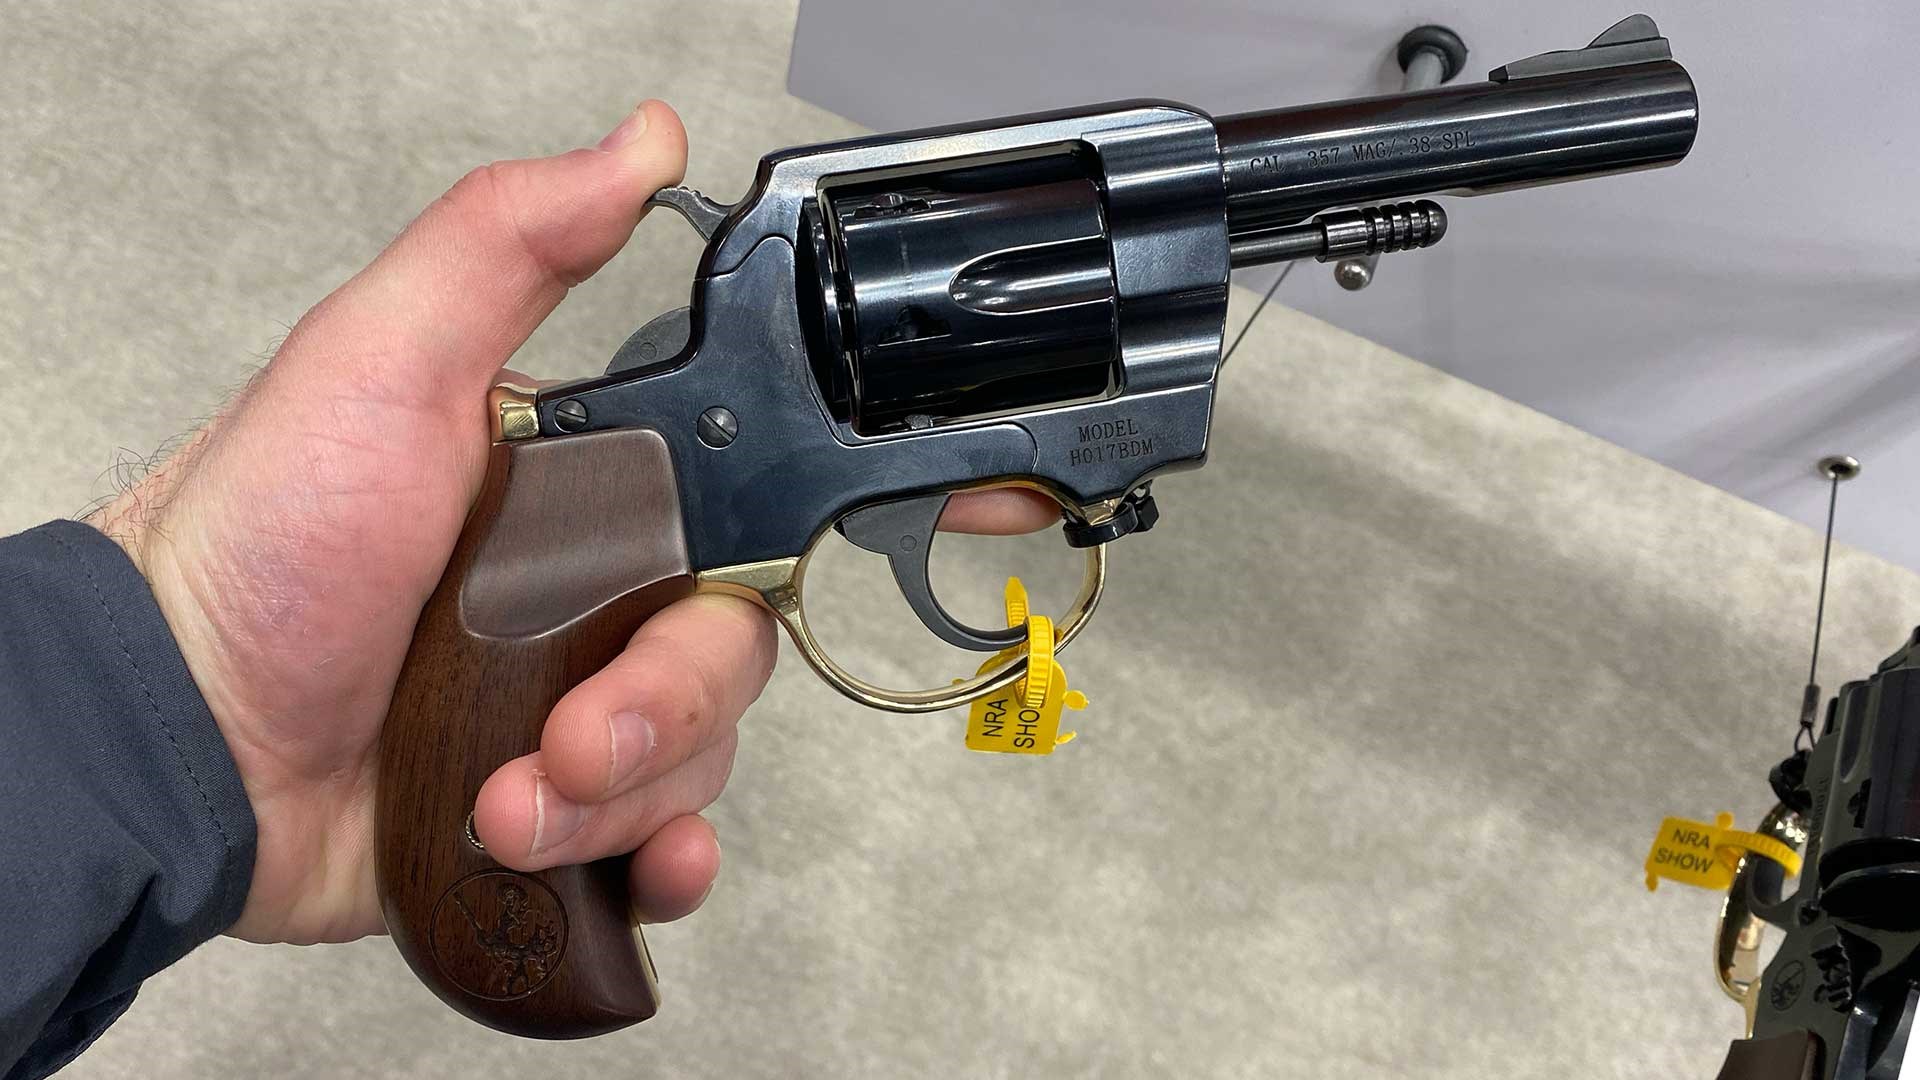 A hand holding the Henry Big Boy revolver with a birdshead grip.